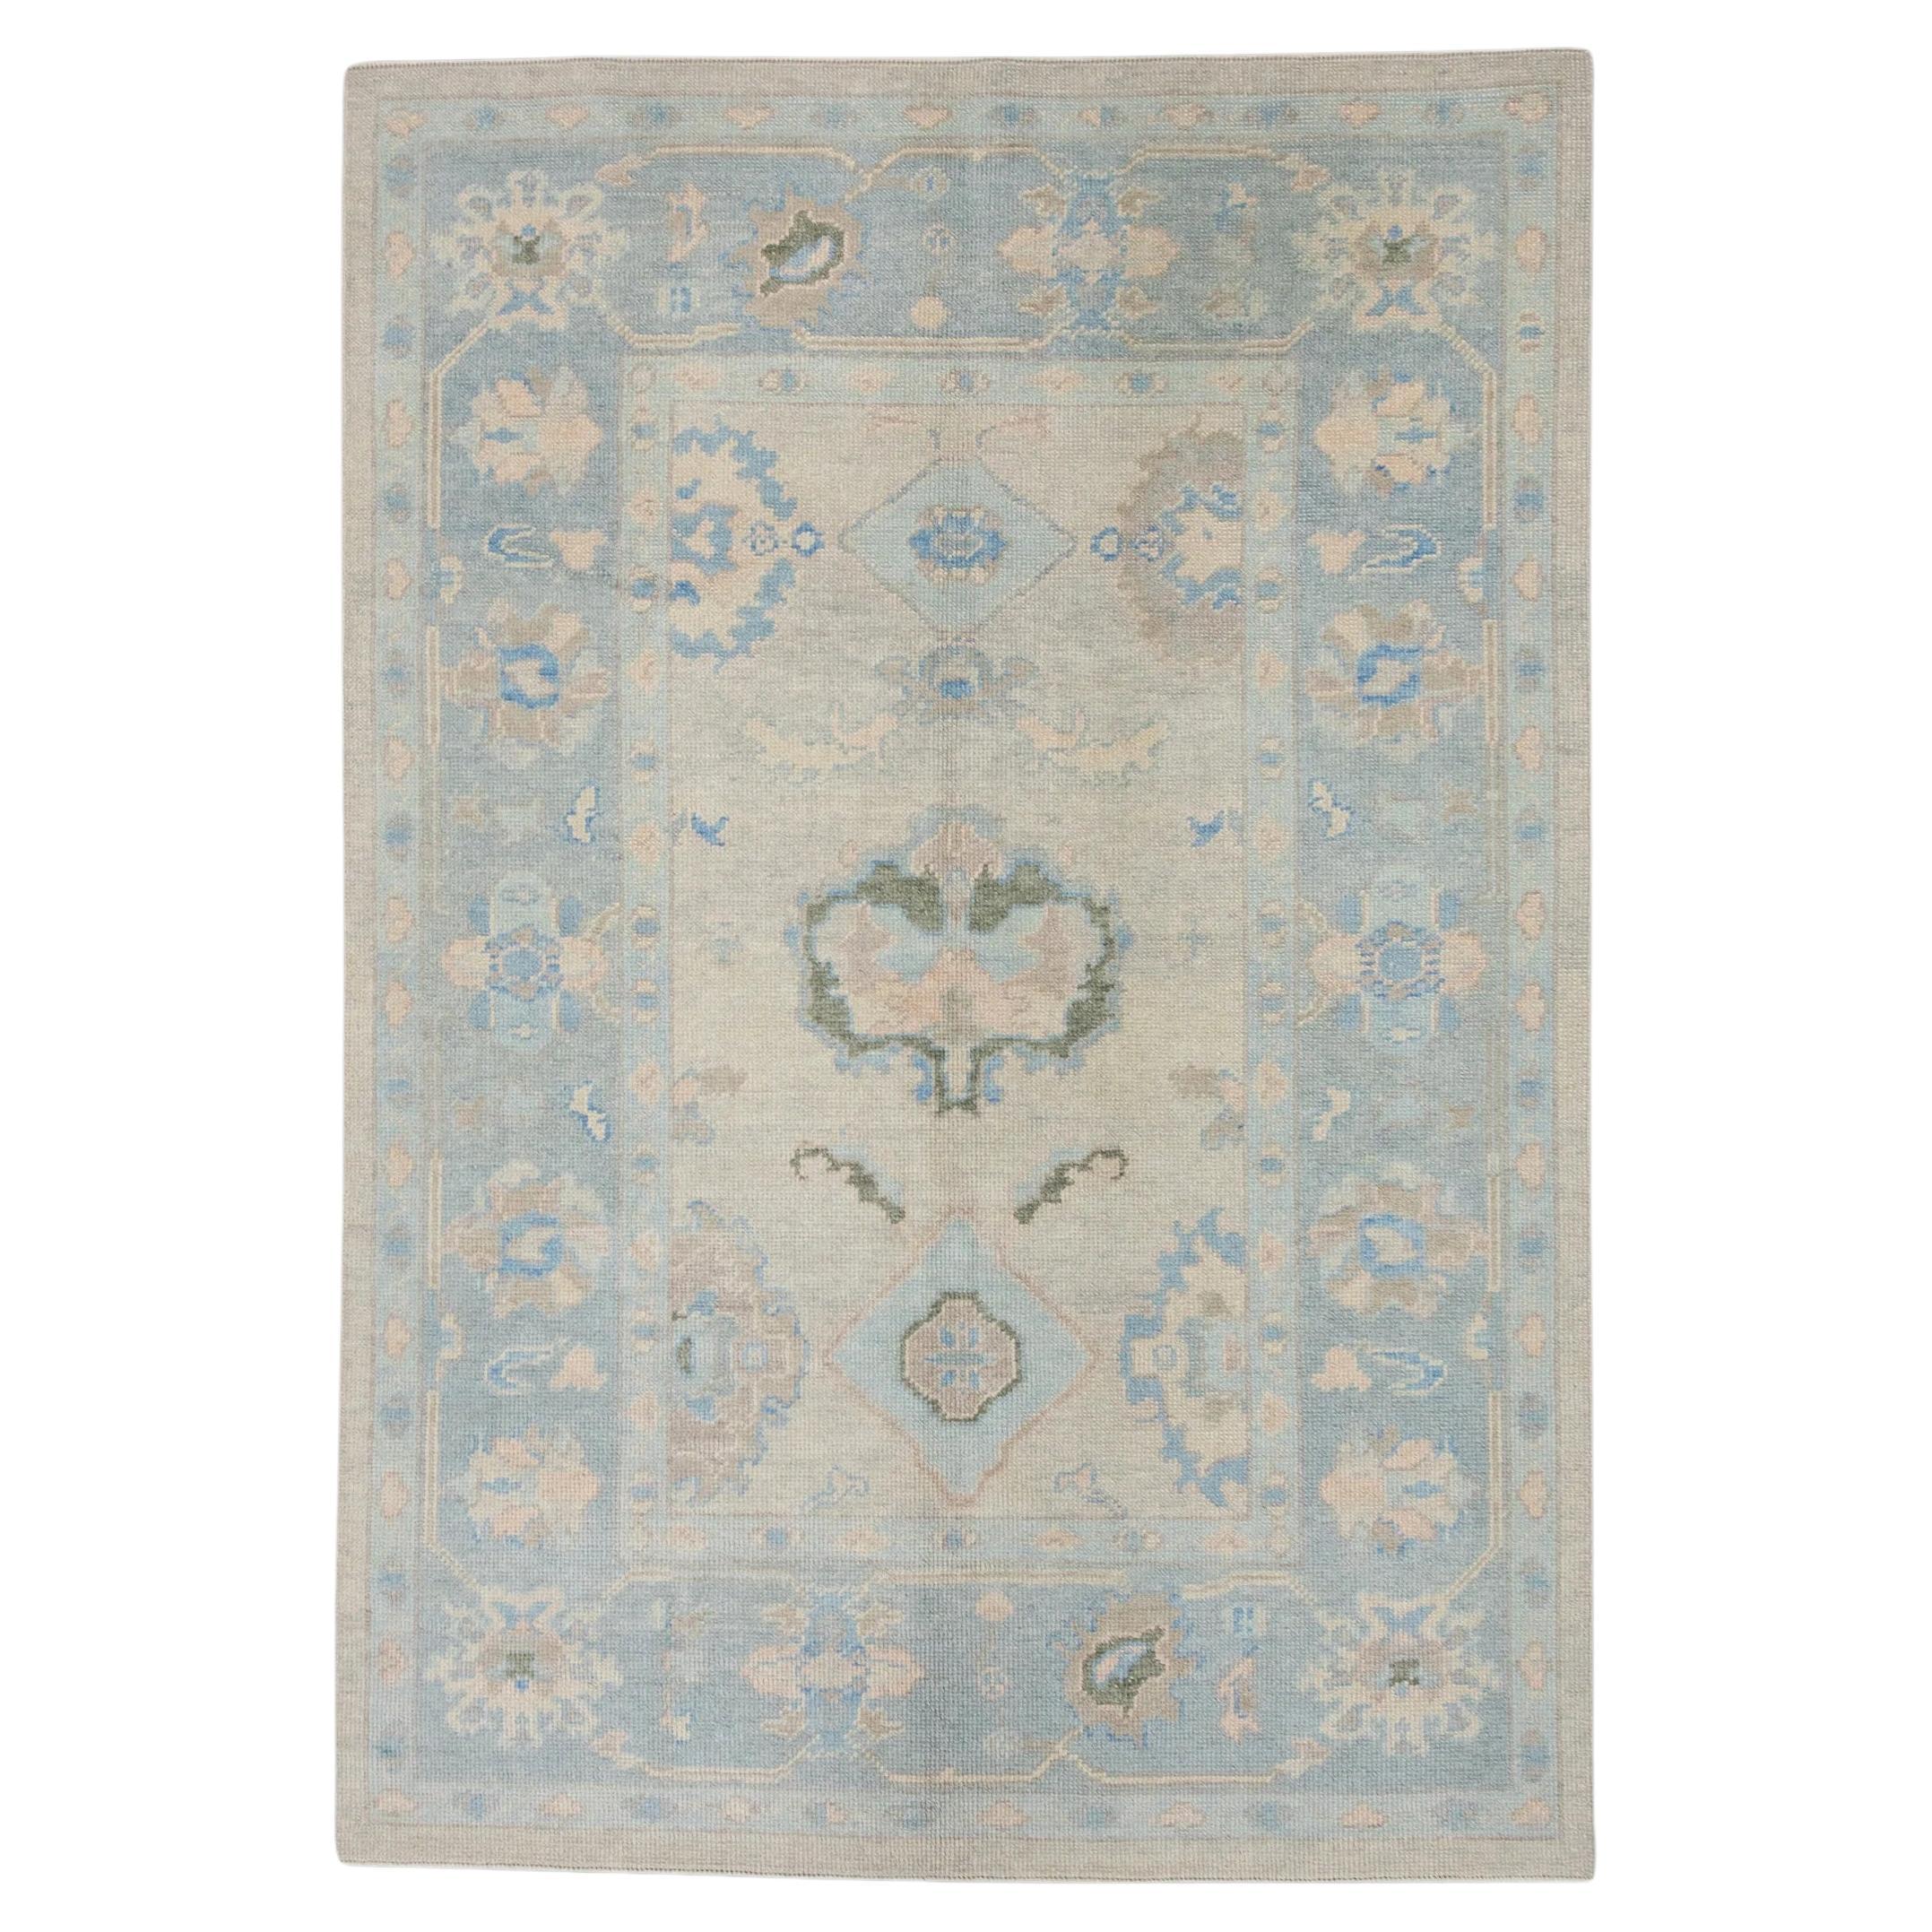 Blue and Pink Floral Handwoven Wool Turkish Oushak Rug 5'1" x 7'2"